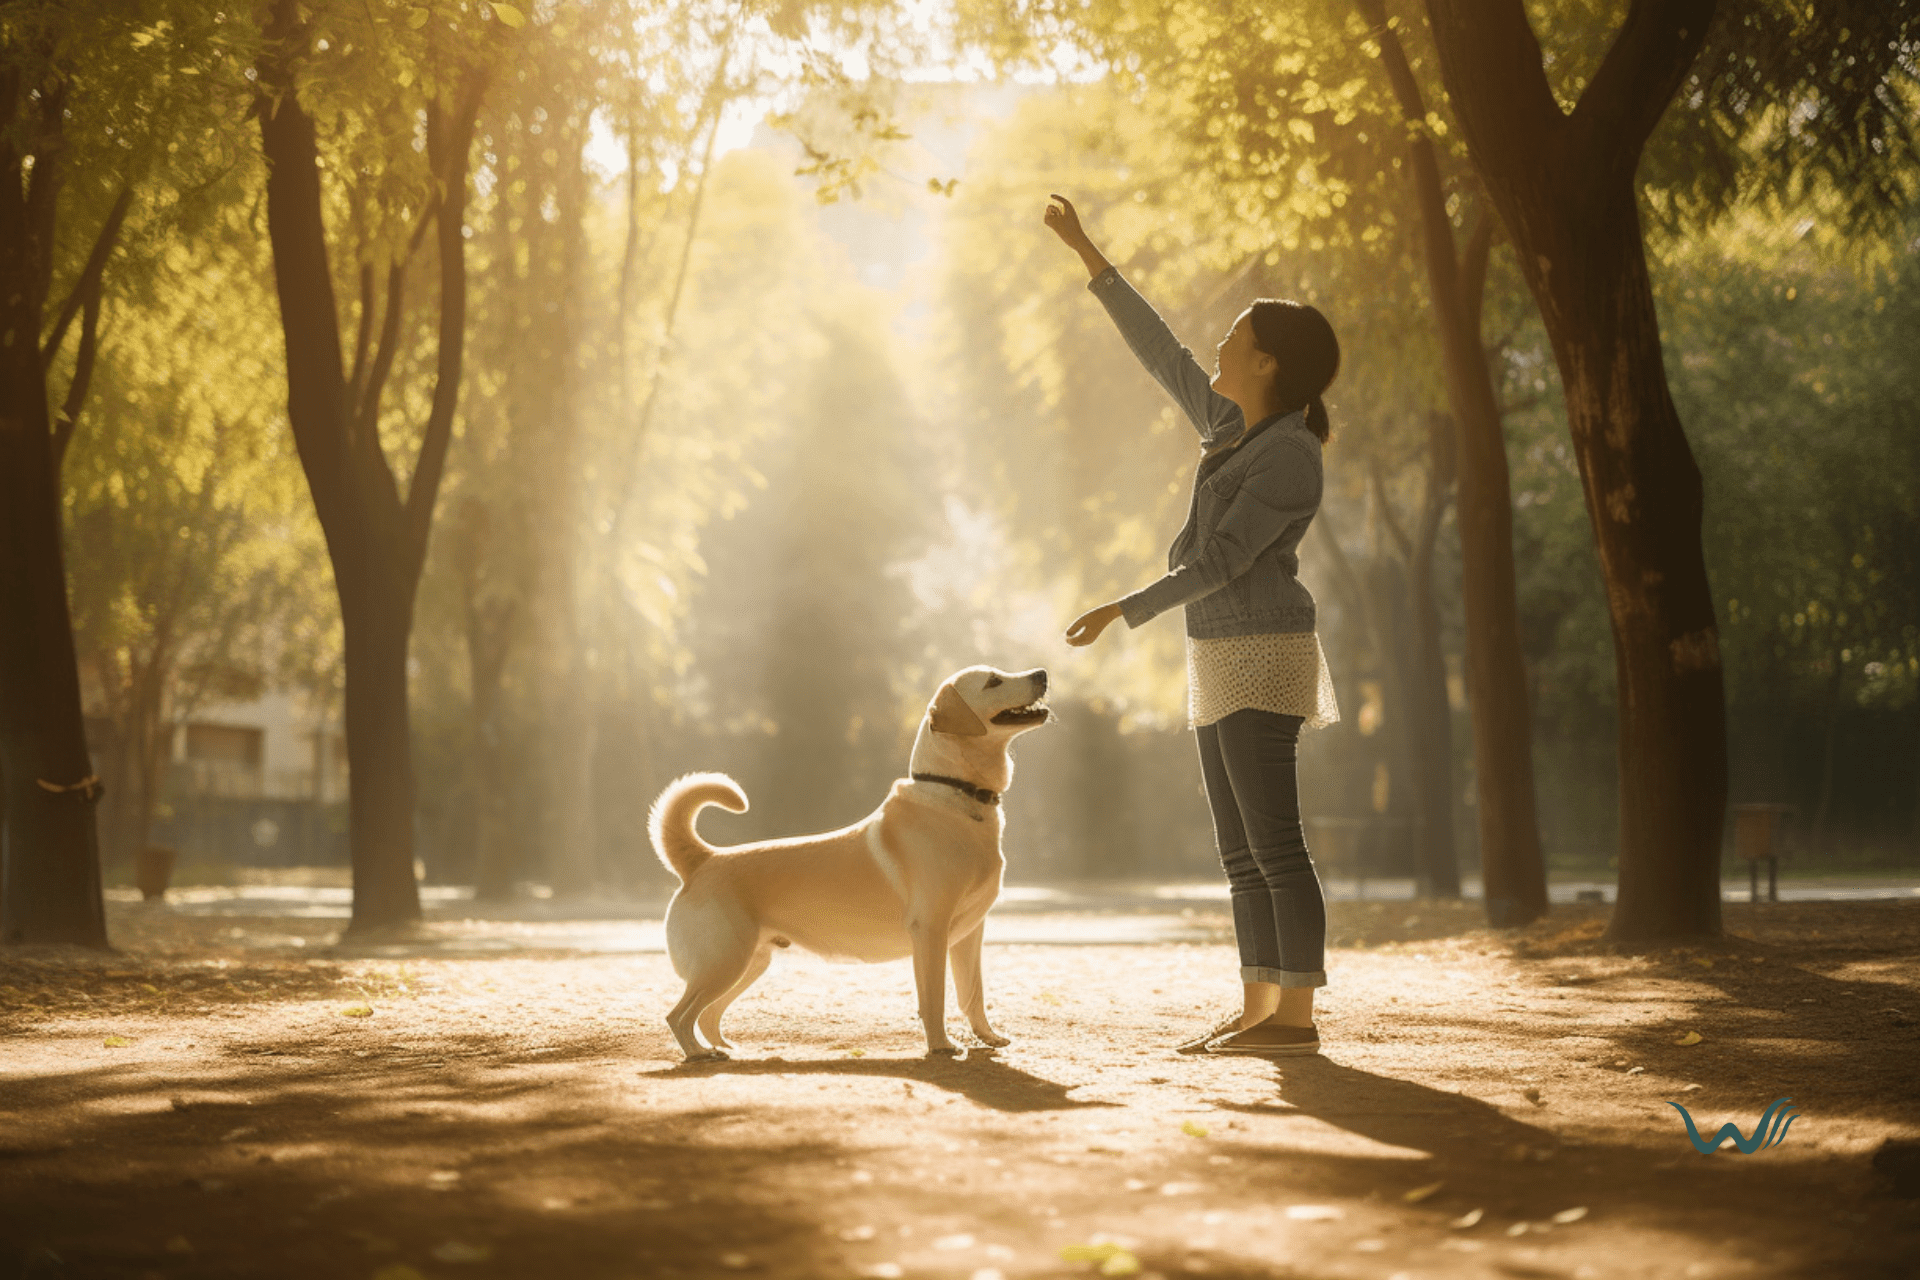 positive reinforcement and building bonds with your pet